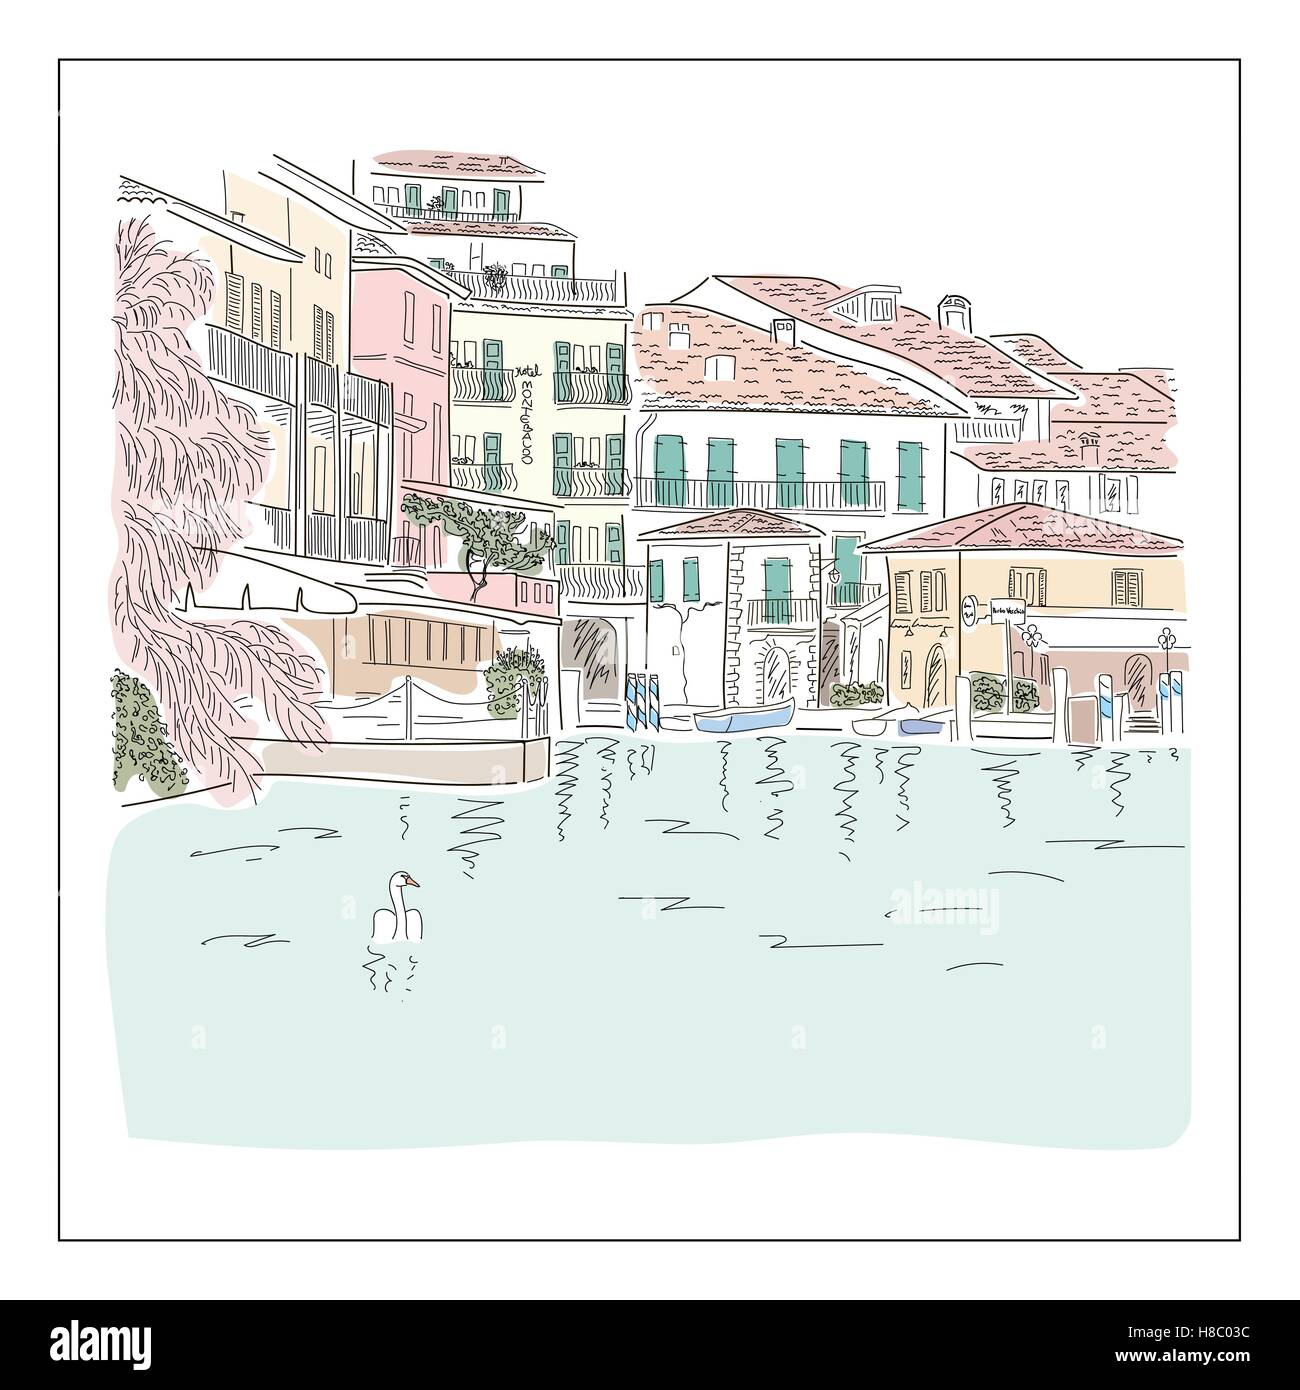 Old europian town on the lake. Hand drawn sketch Stock Vector